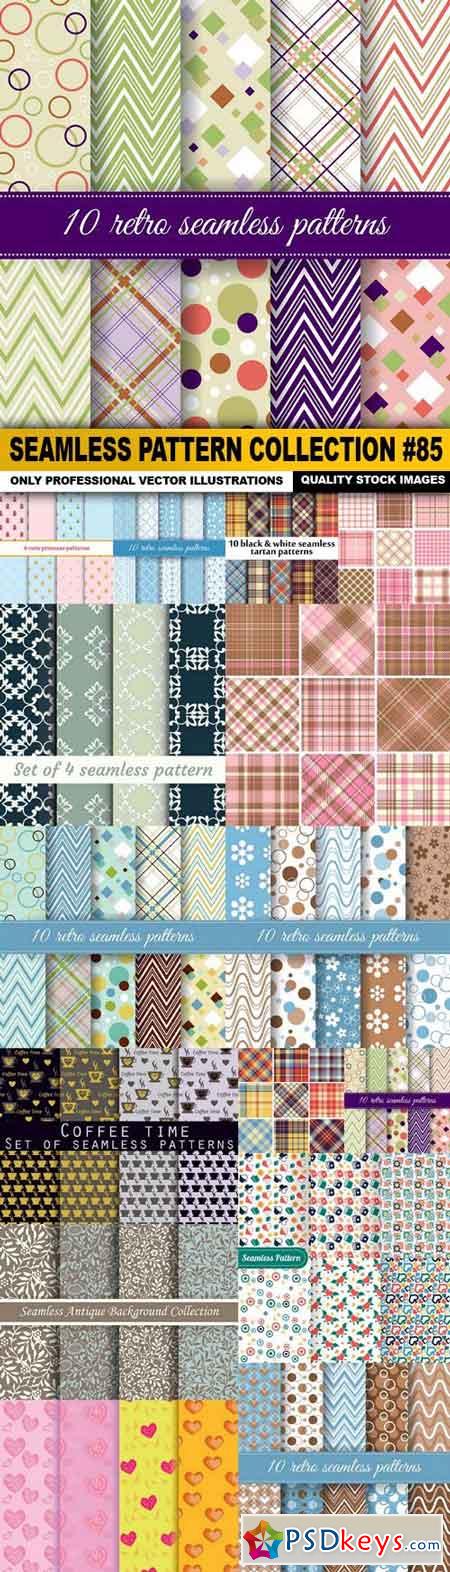 Seamless Pattern Collection #85 - 15 Vector